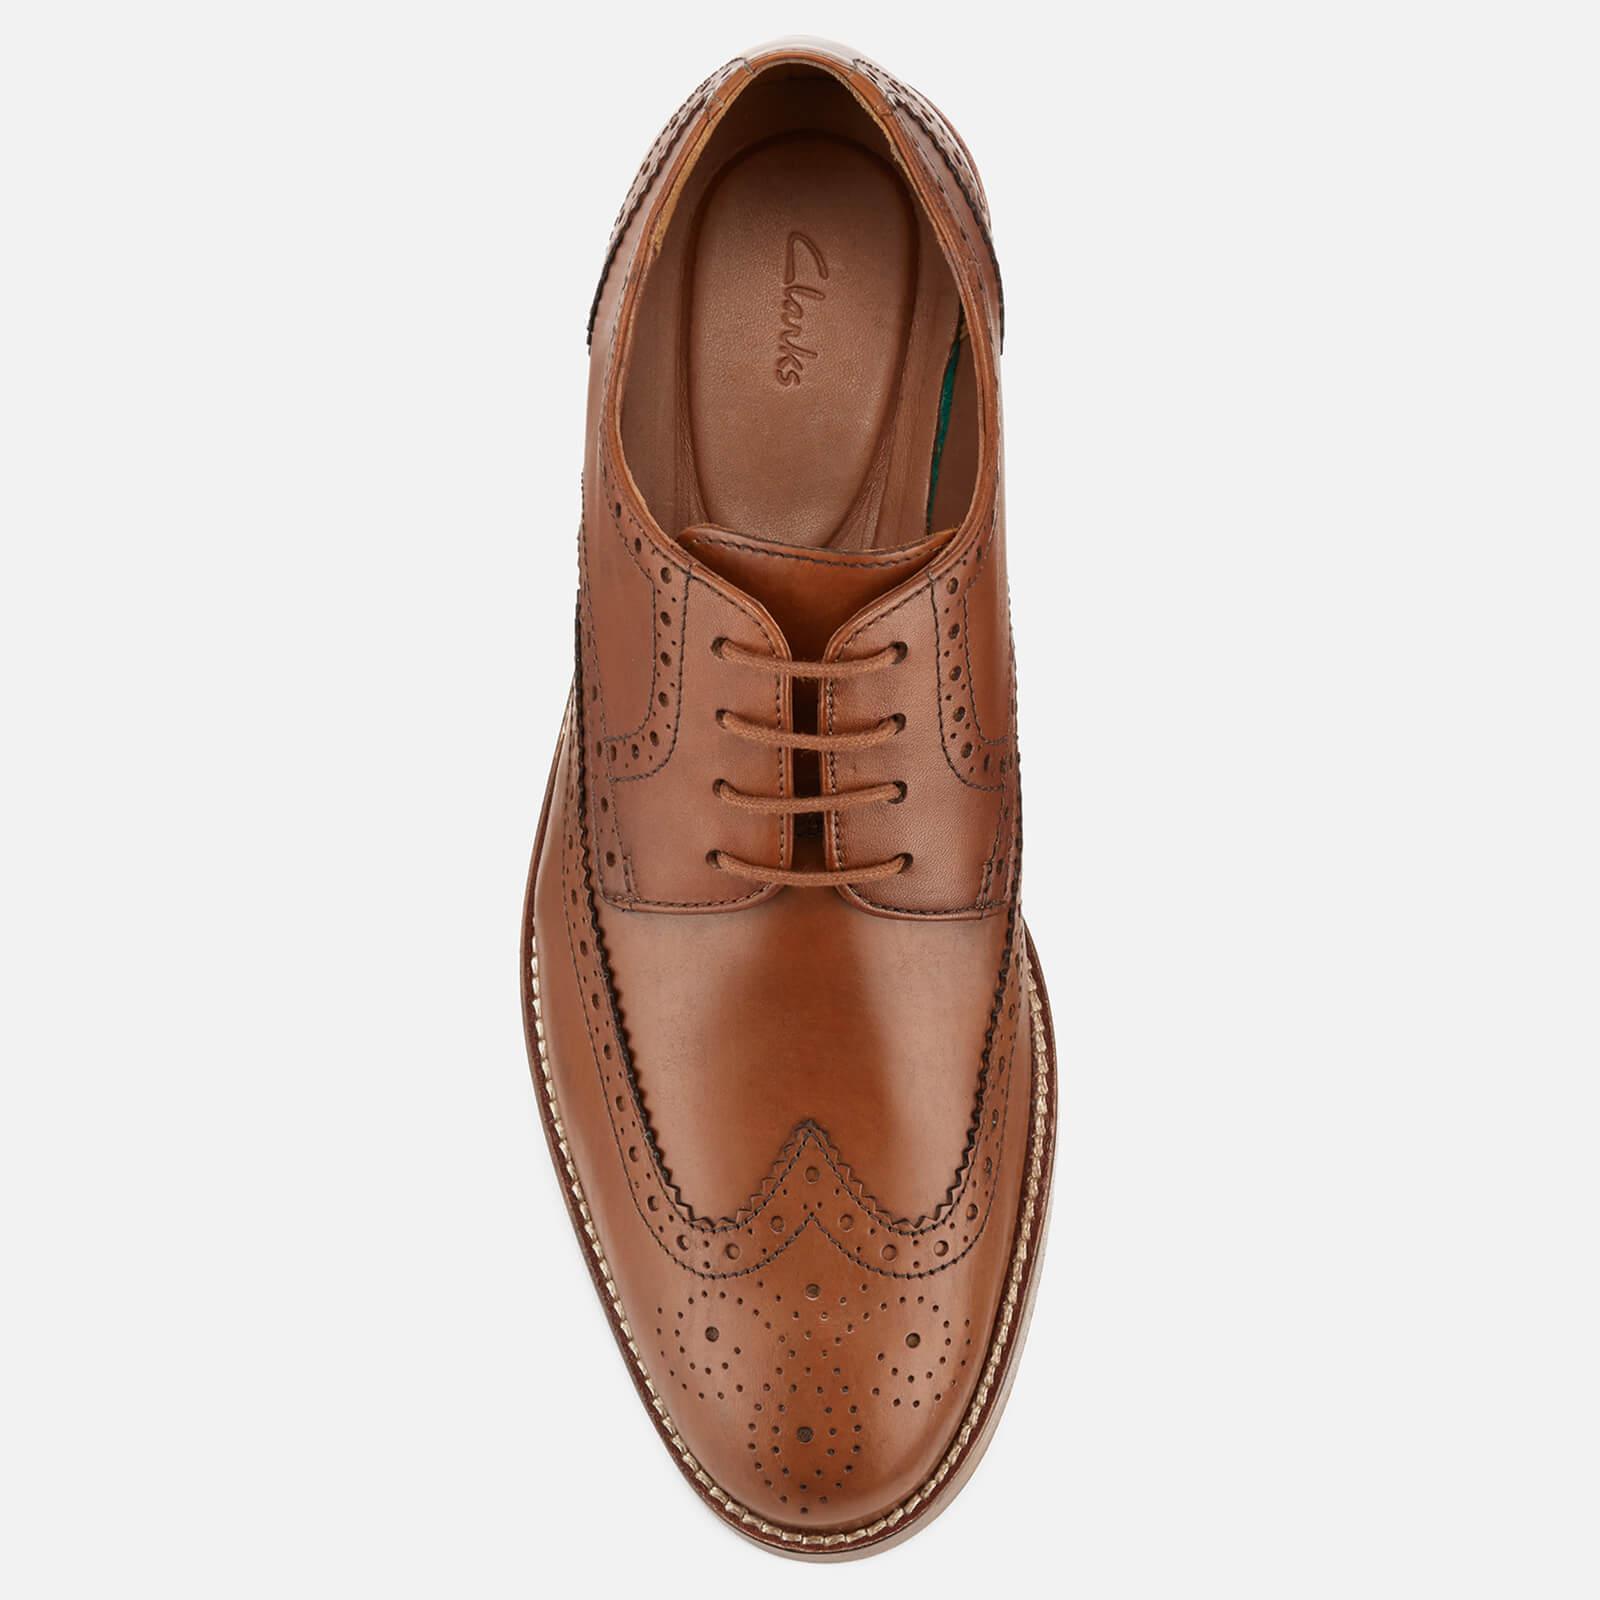 Clarks James Wing Leather Brogues in 